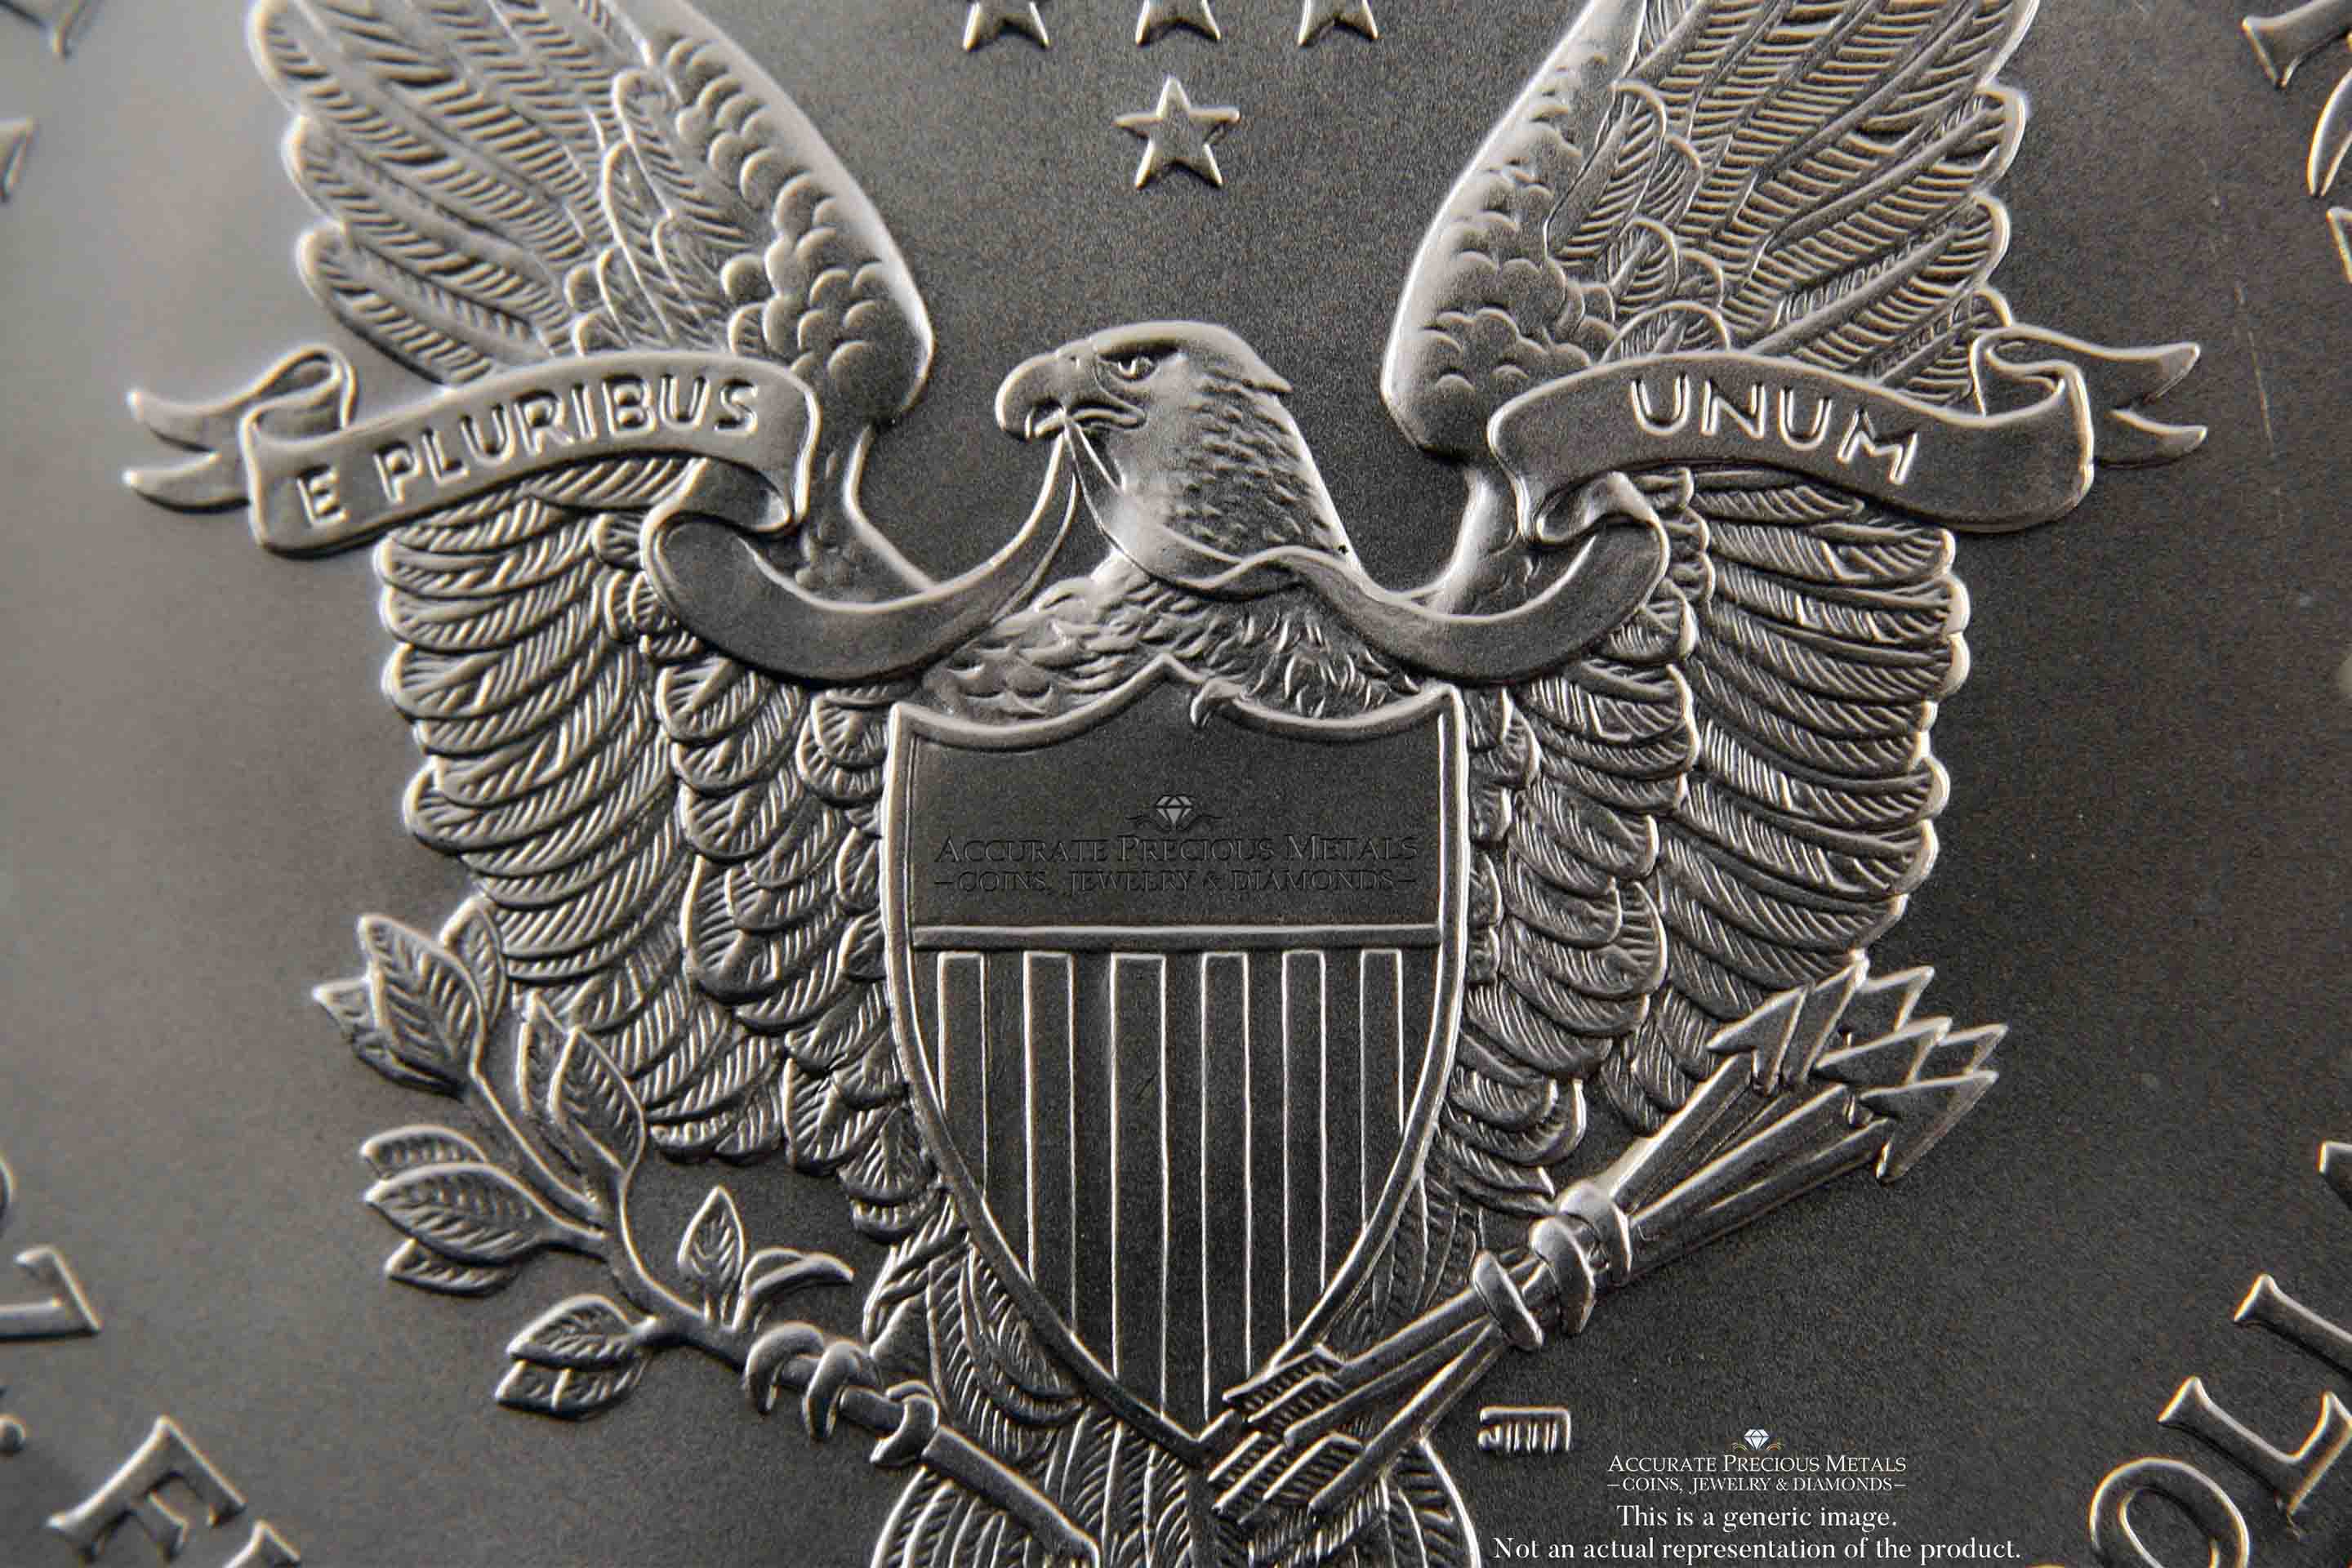 5 Ounce Libertad Silver Coin: Stunning silver coin featuring the iconic Libertad design, a coveted addition for silver bullion collectors and investors seeking larger options.